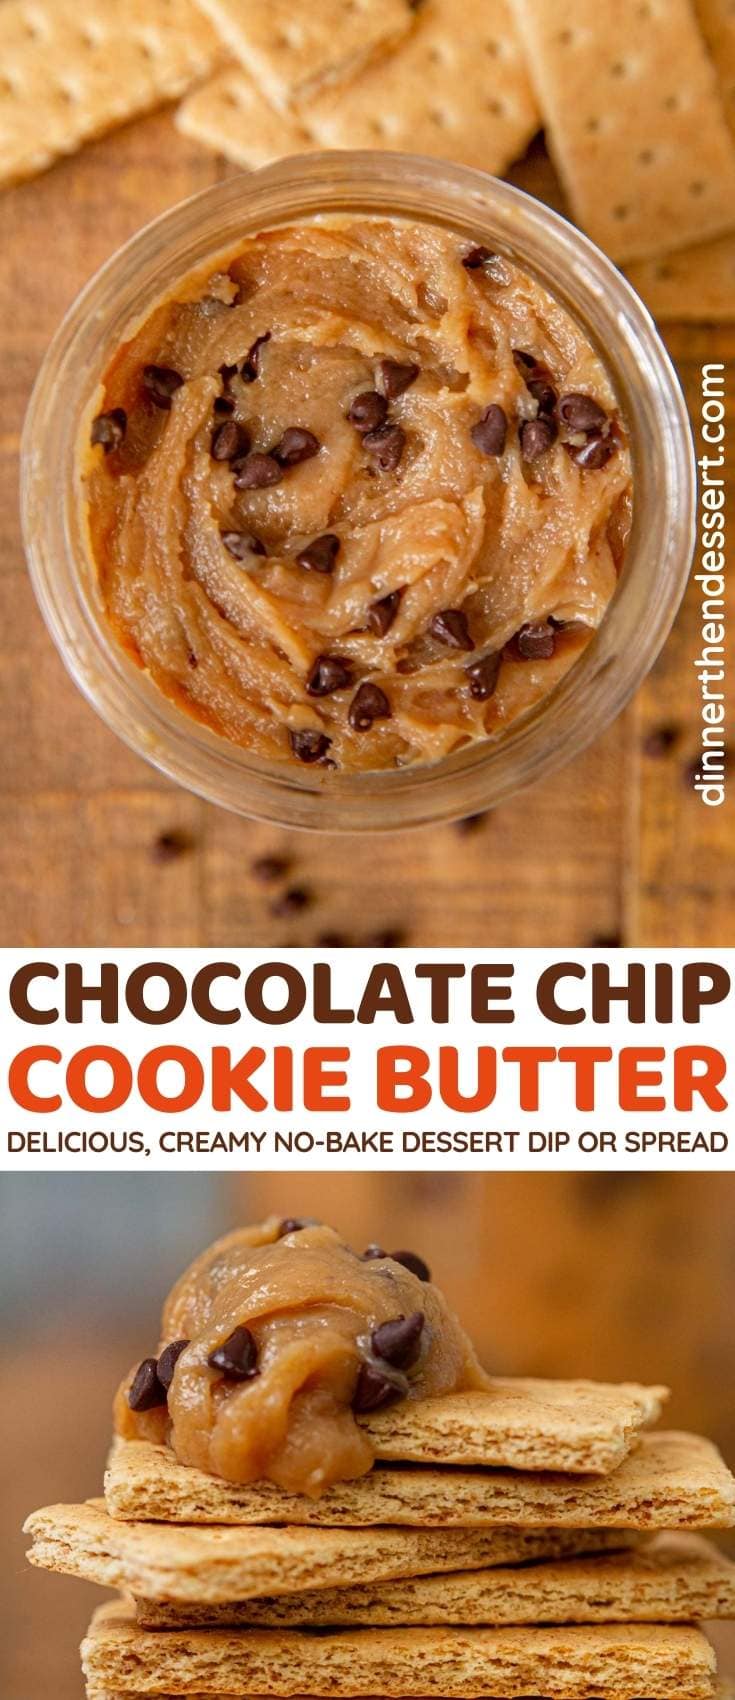 Chocolate Chip Cookie Butter collage